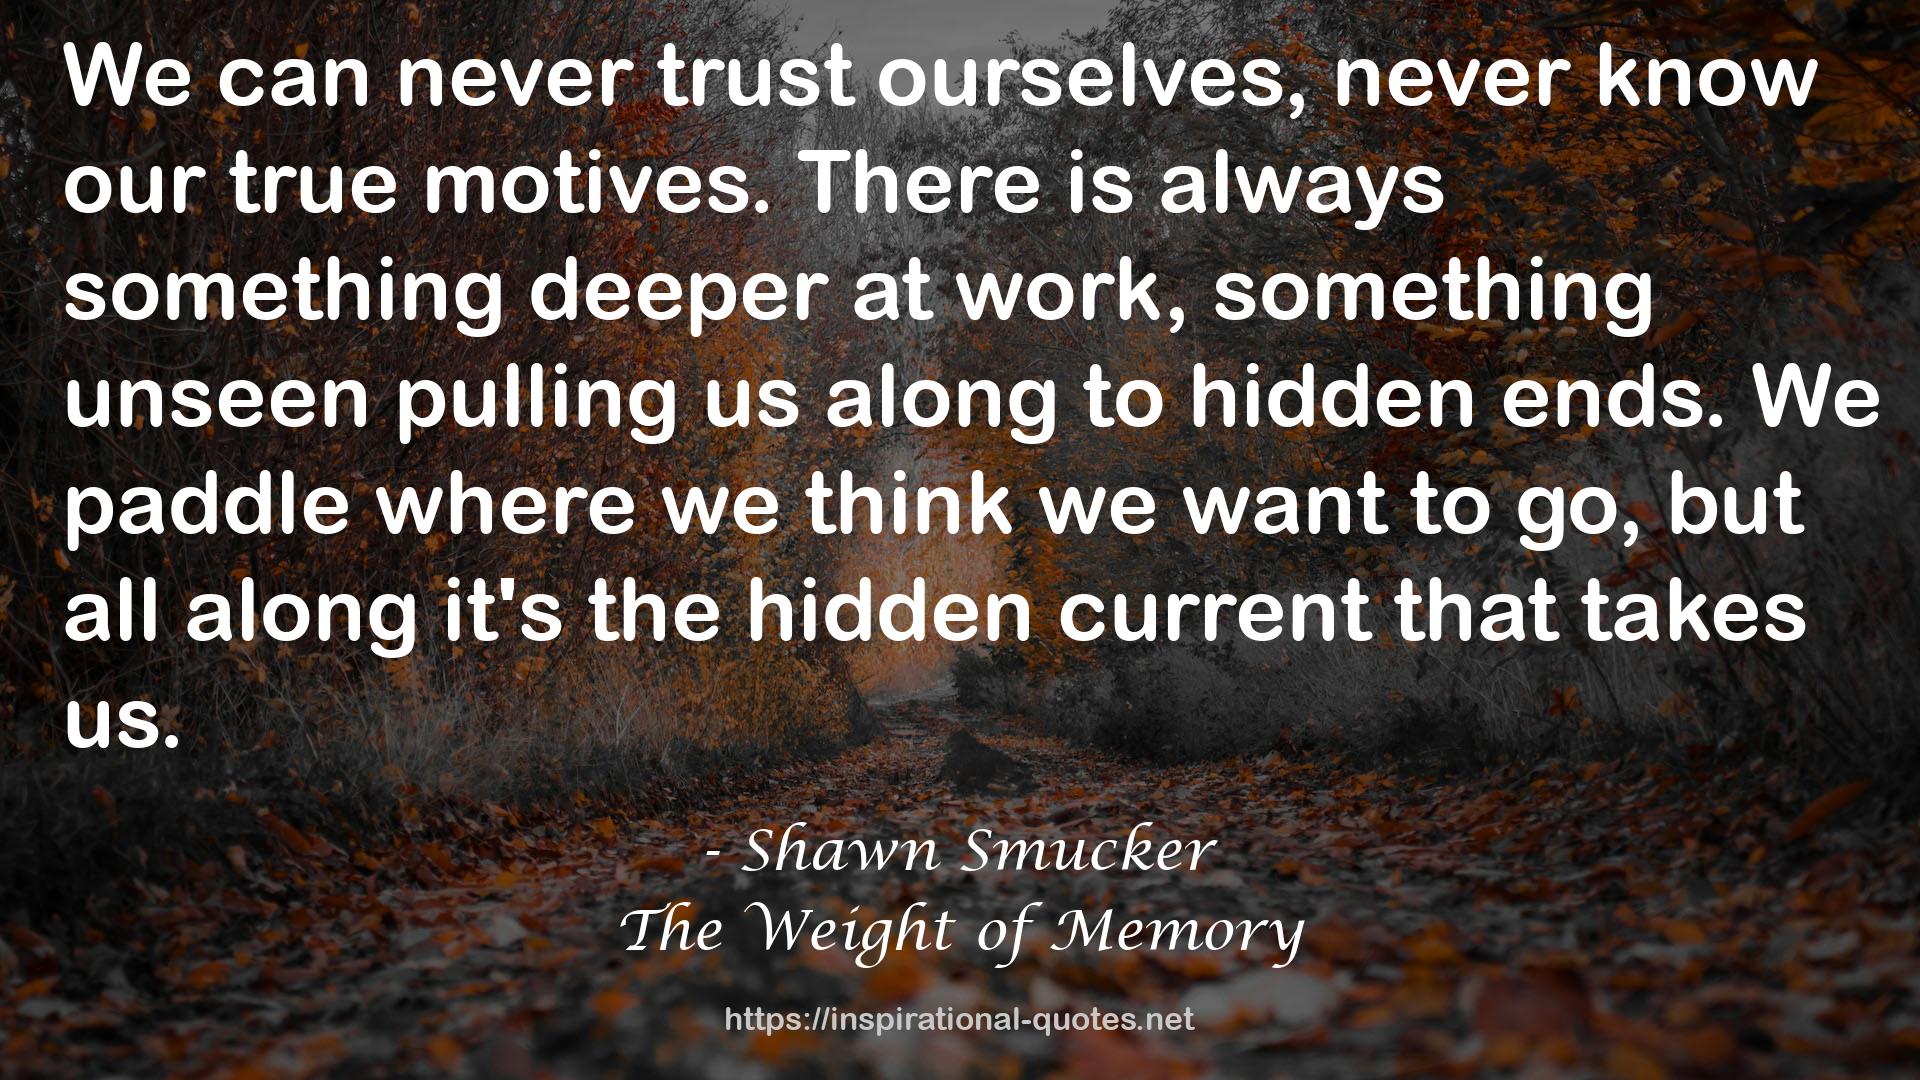 The Weight of Memory QUOTES